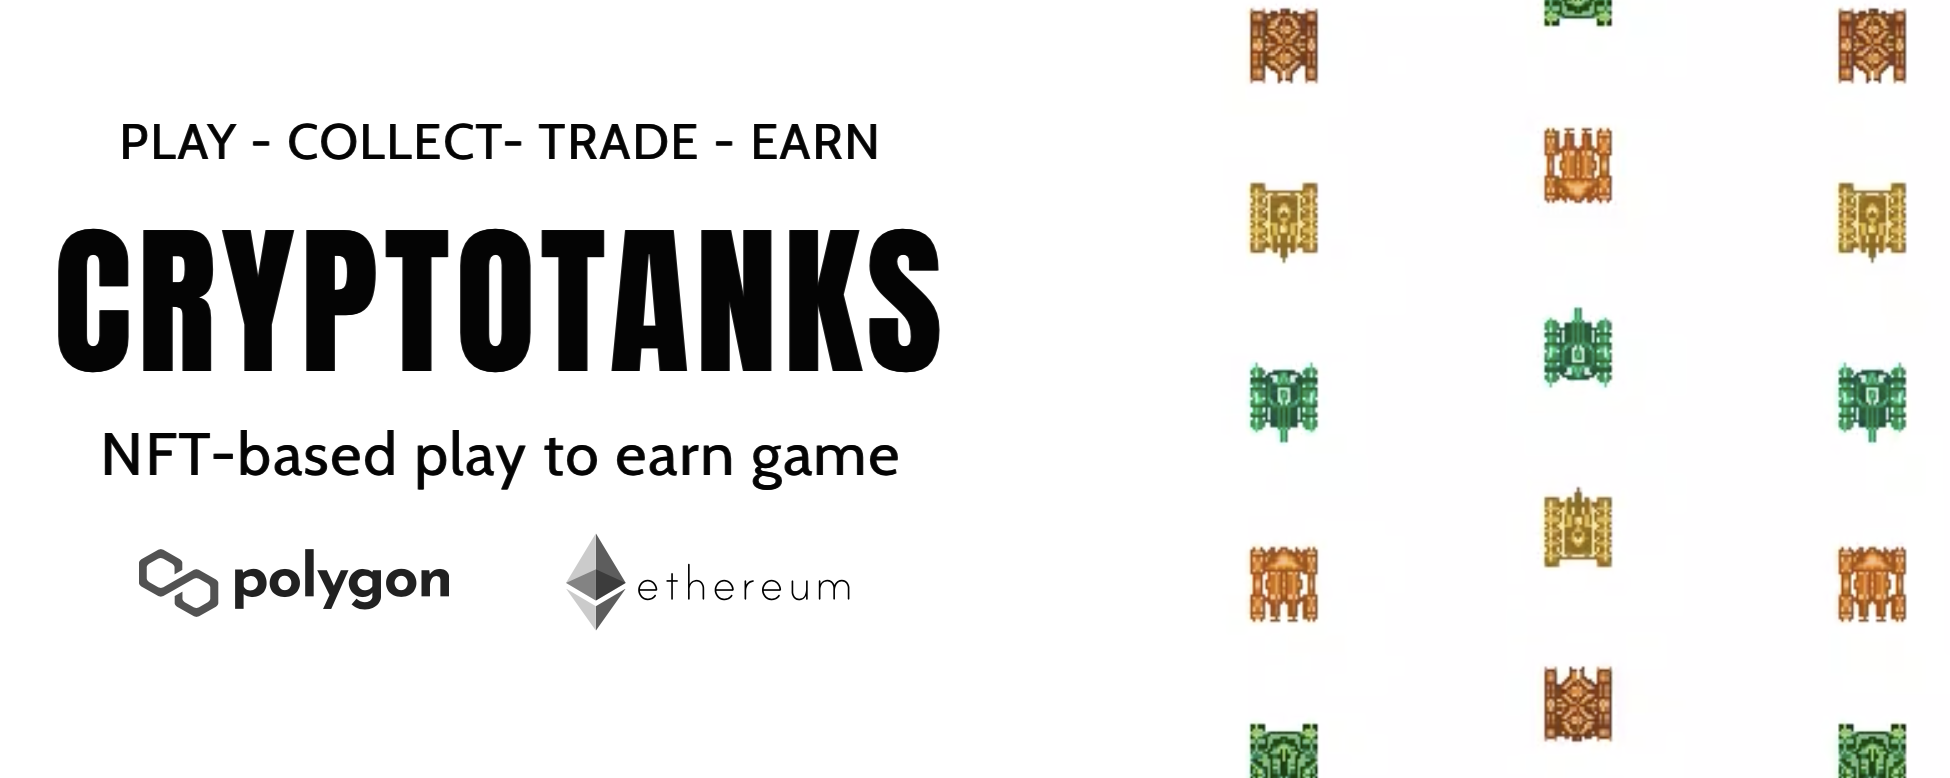 CryptoTanks is a Play-to-Earn metaverse game